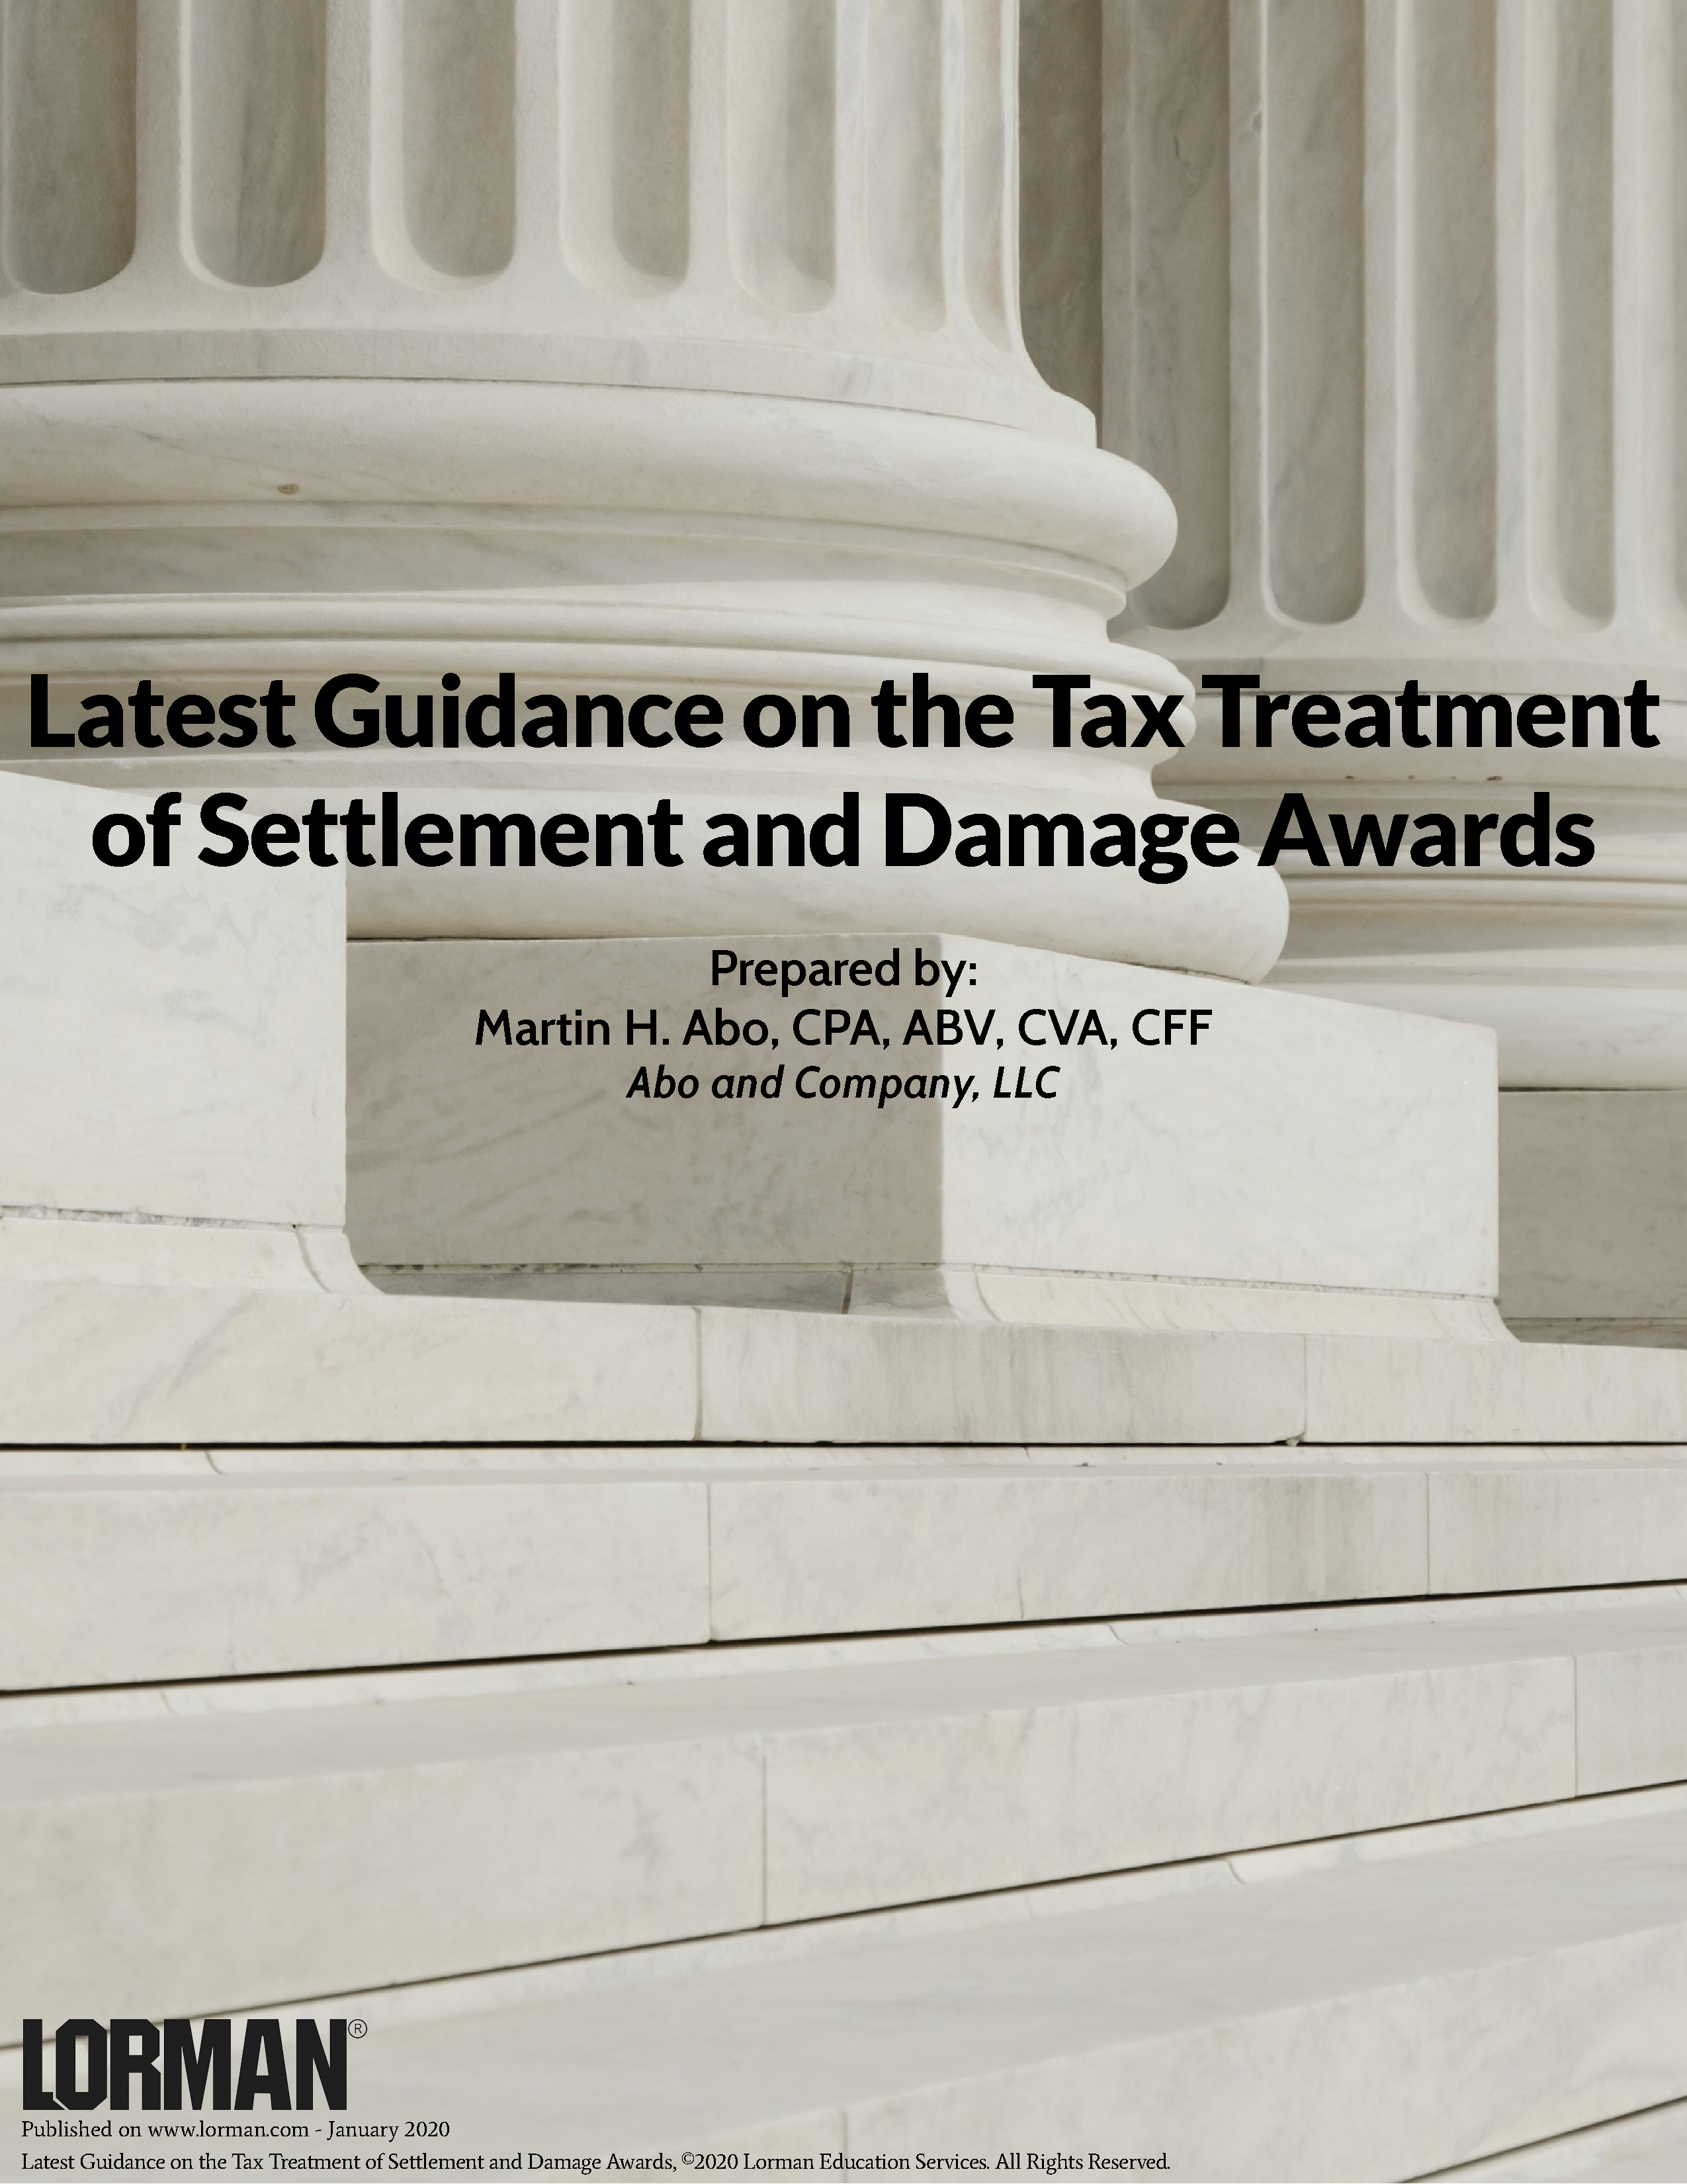 Latest Guidance on the Tax Treatment of Settlement and Damage Awards